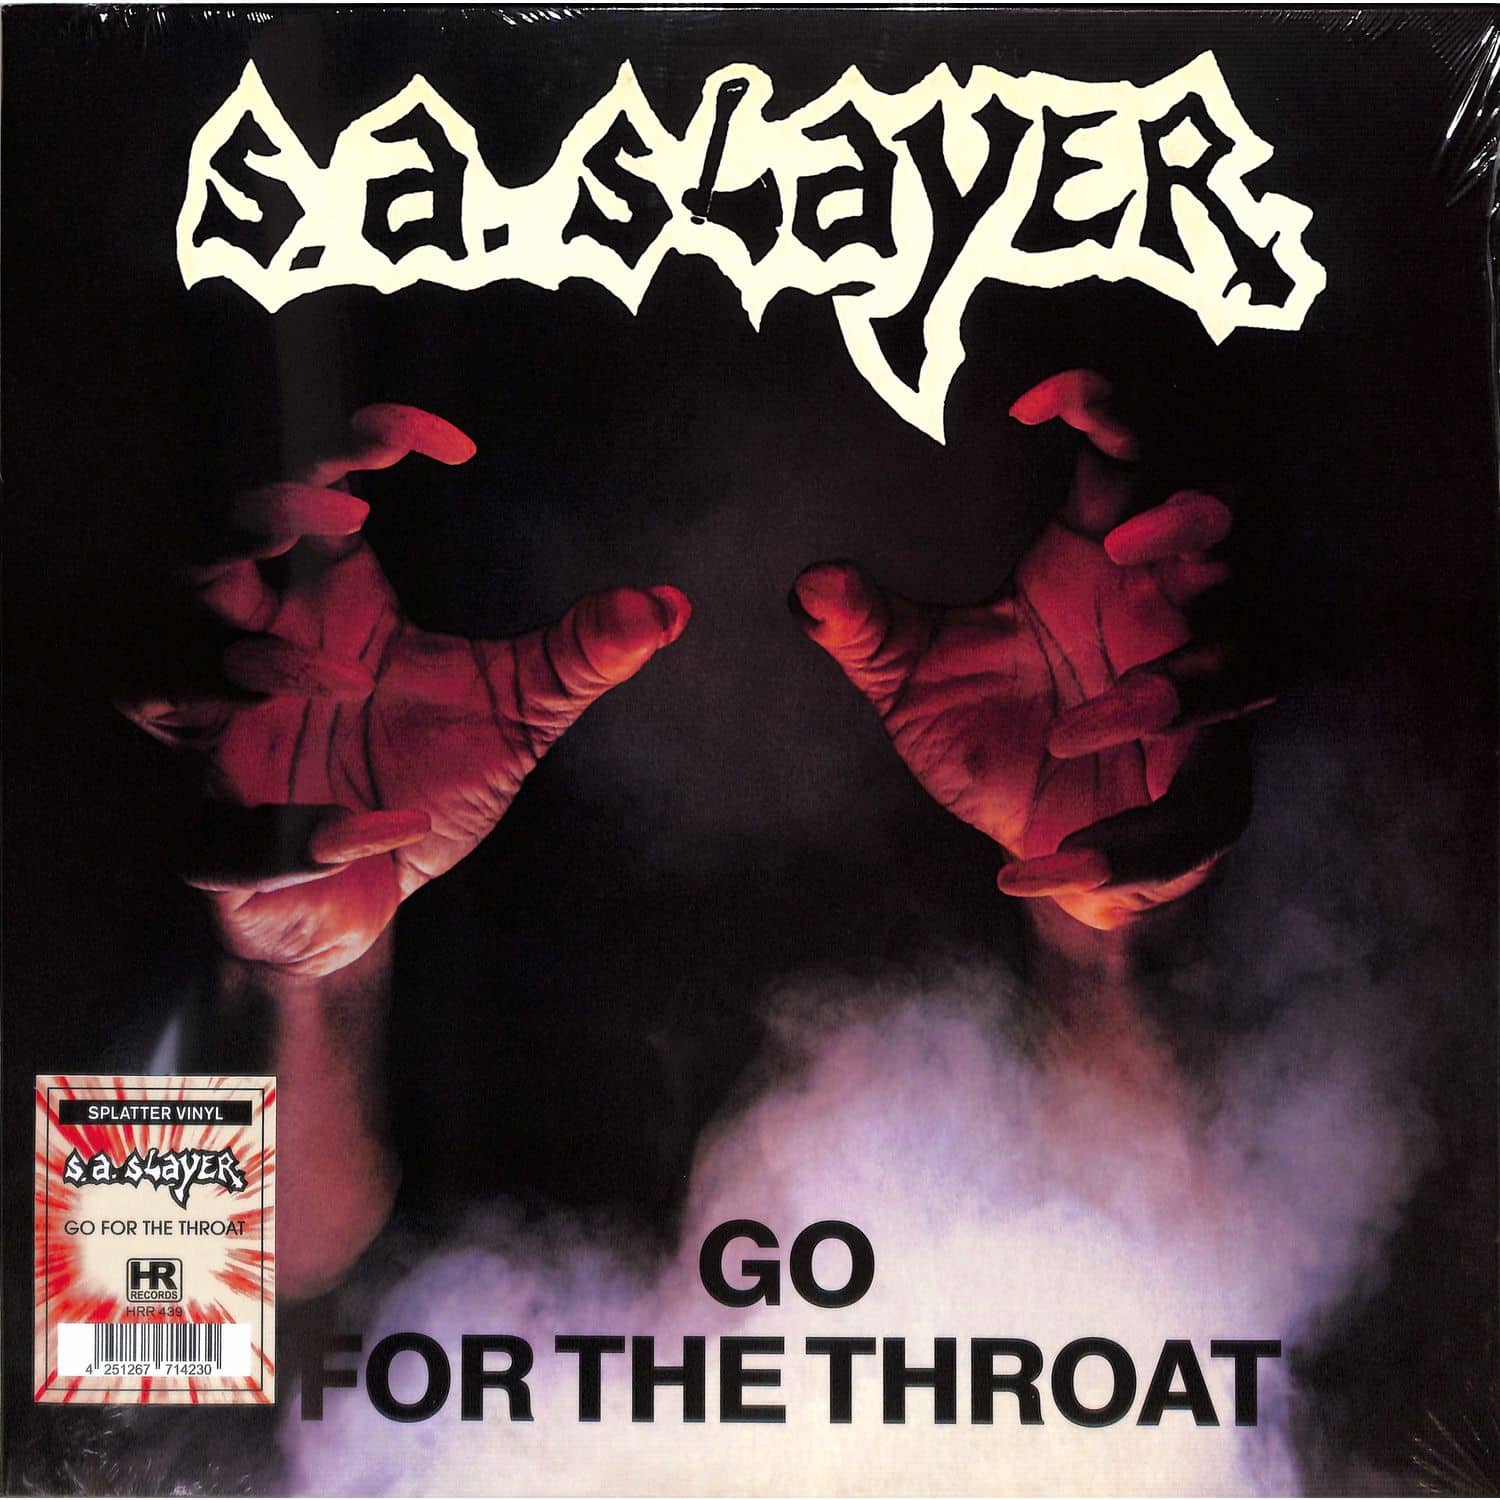 S.A.Slayer - GO FOR THE THROAT 